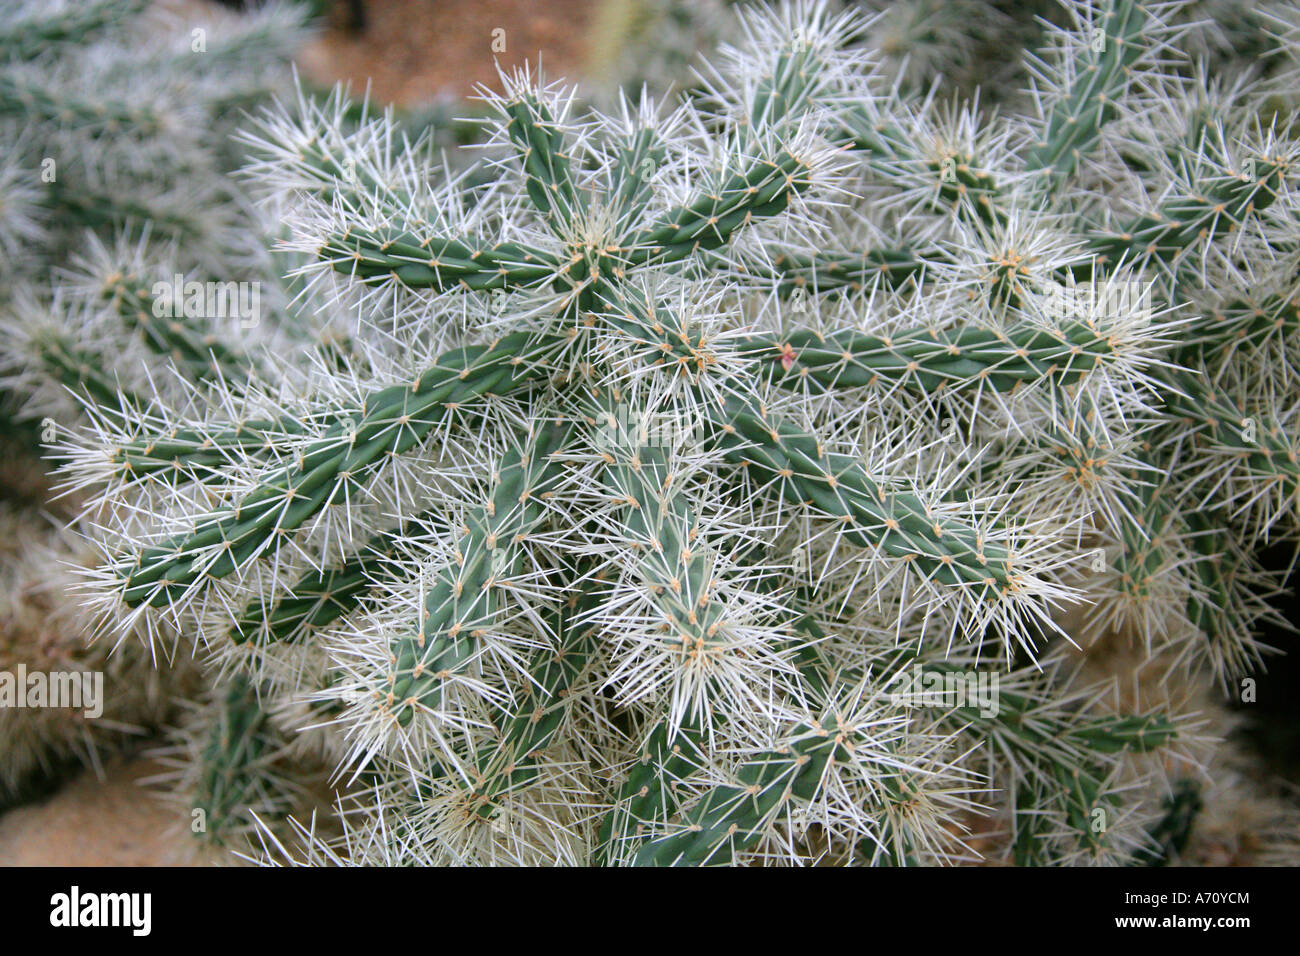 Abrojo, Clavellina, Coyonoxtle, Sheathed Cholla, Tencholote, Cylindropuntia tunicata, Cactaceae. North America. Stock Photo